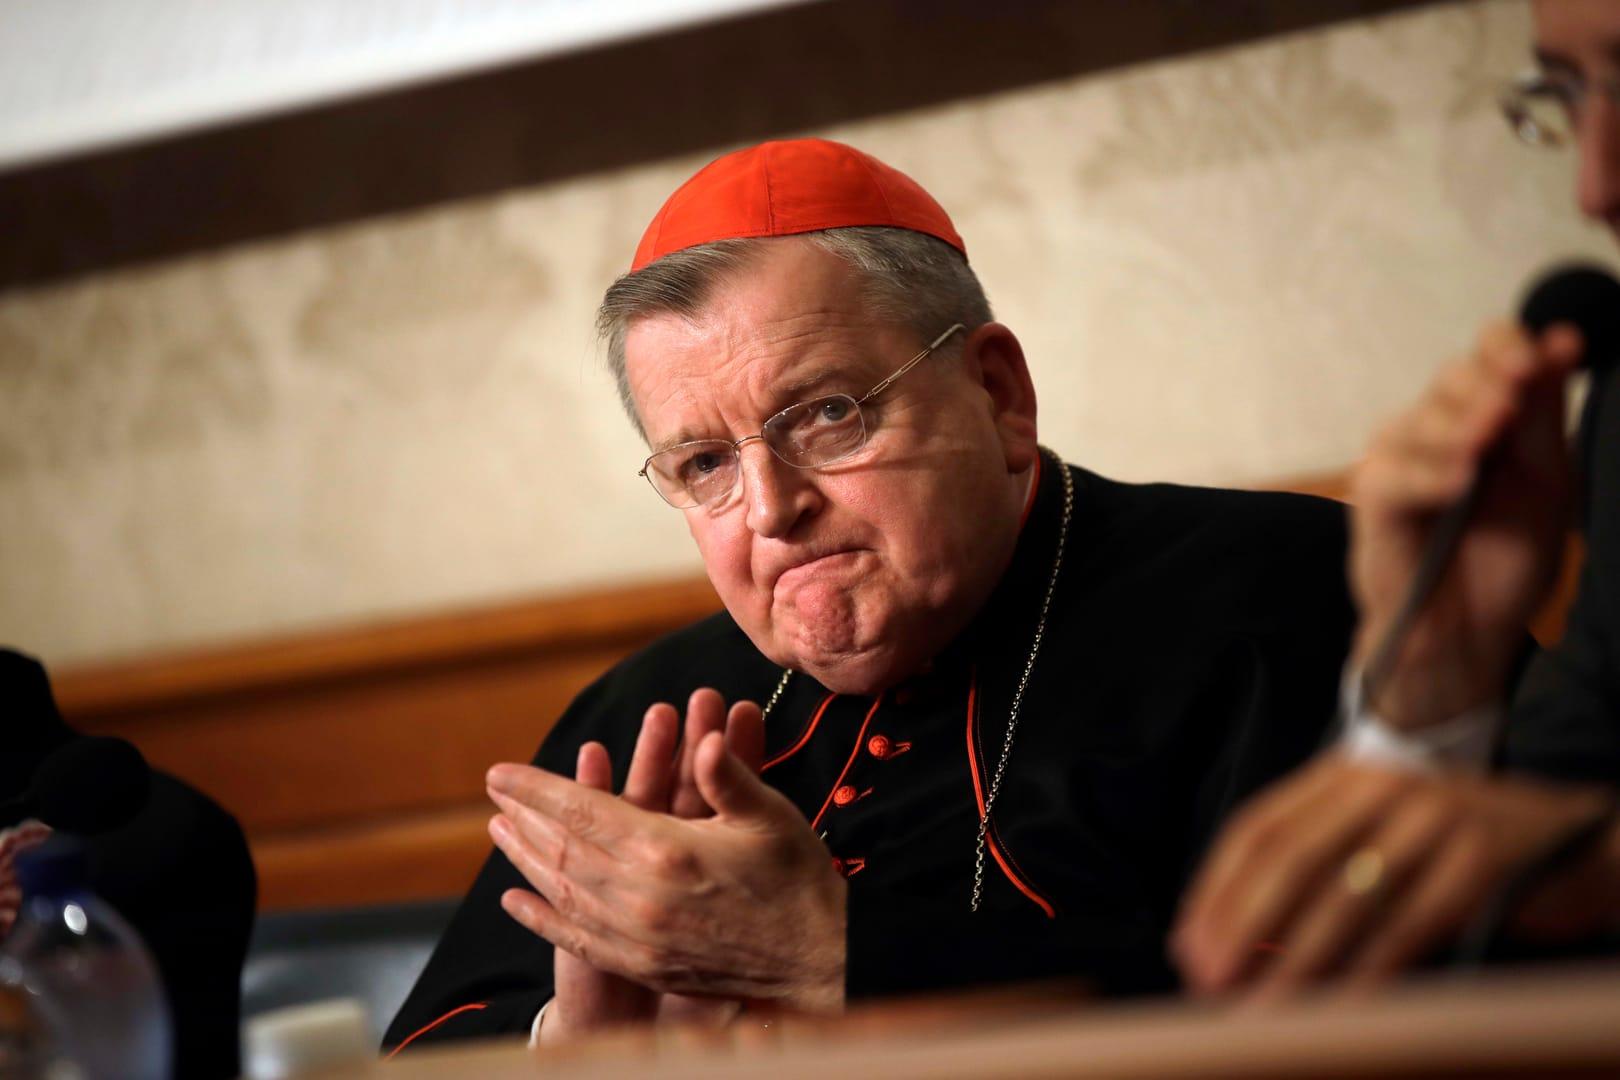 Cardinal Burke hospitalized with COVID, breathing with ventilator